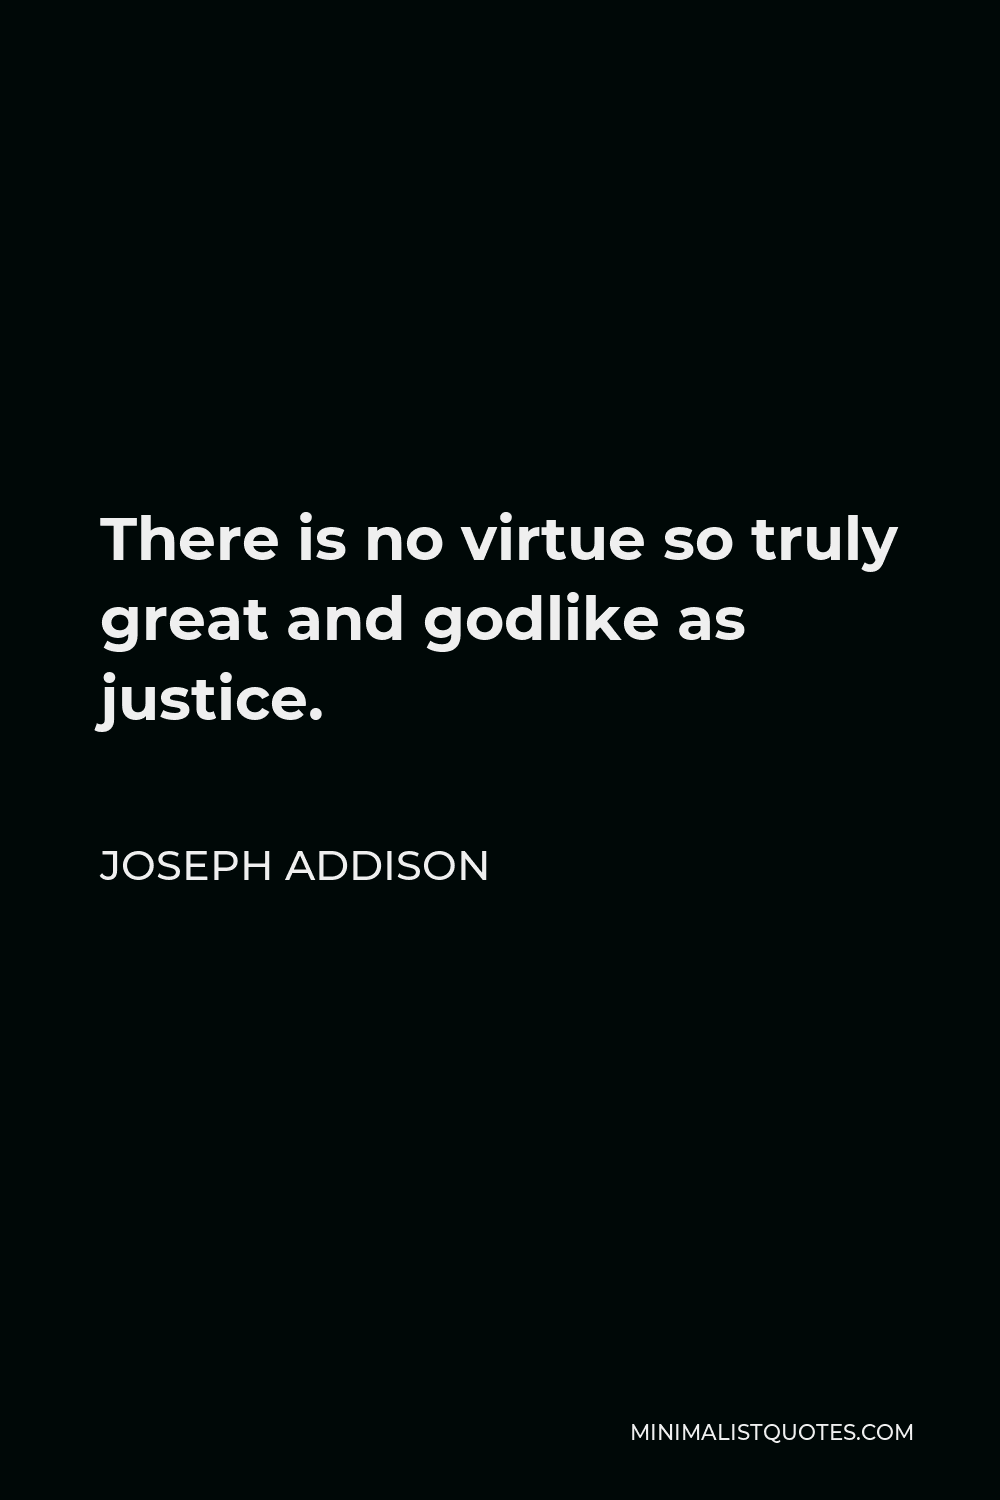 Joseph Addison Quote - There is no virtue so truly great and godlike as justice.